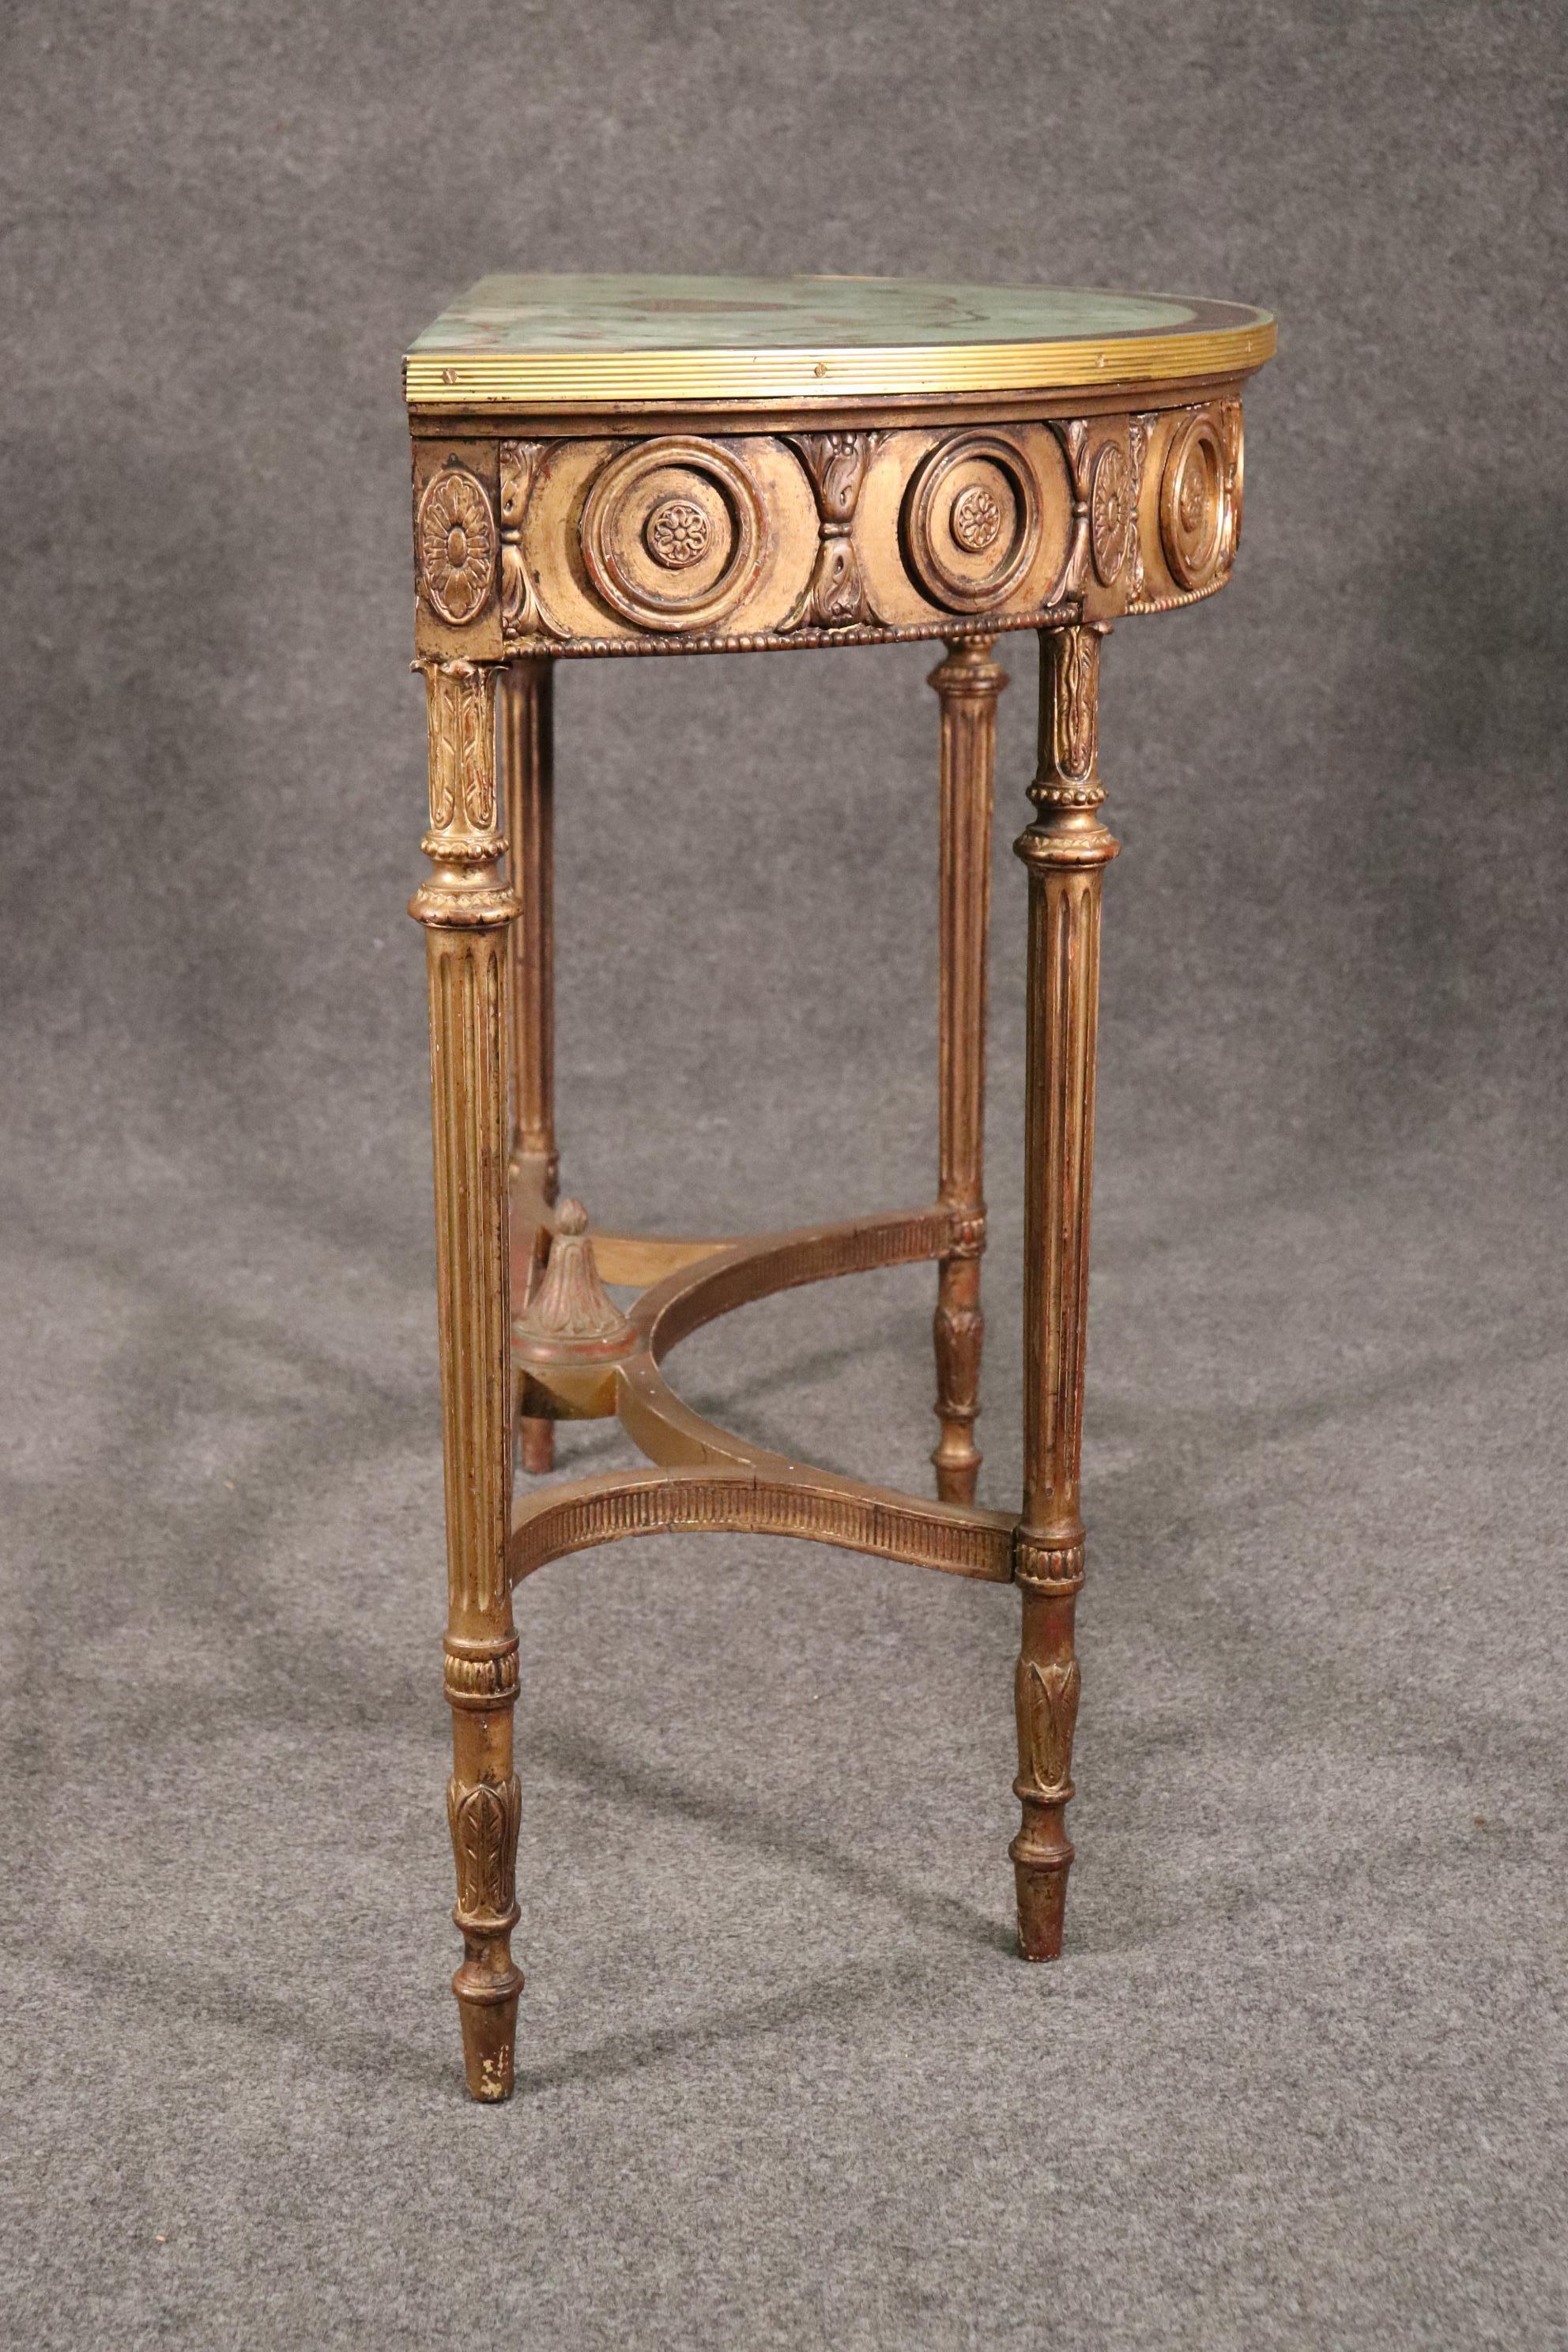 Fine Quality Paint Decorated Gilded Adams Demilune Console Table, Circa 1890 For Sale 1